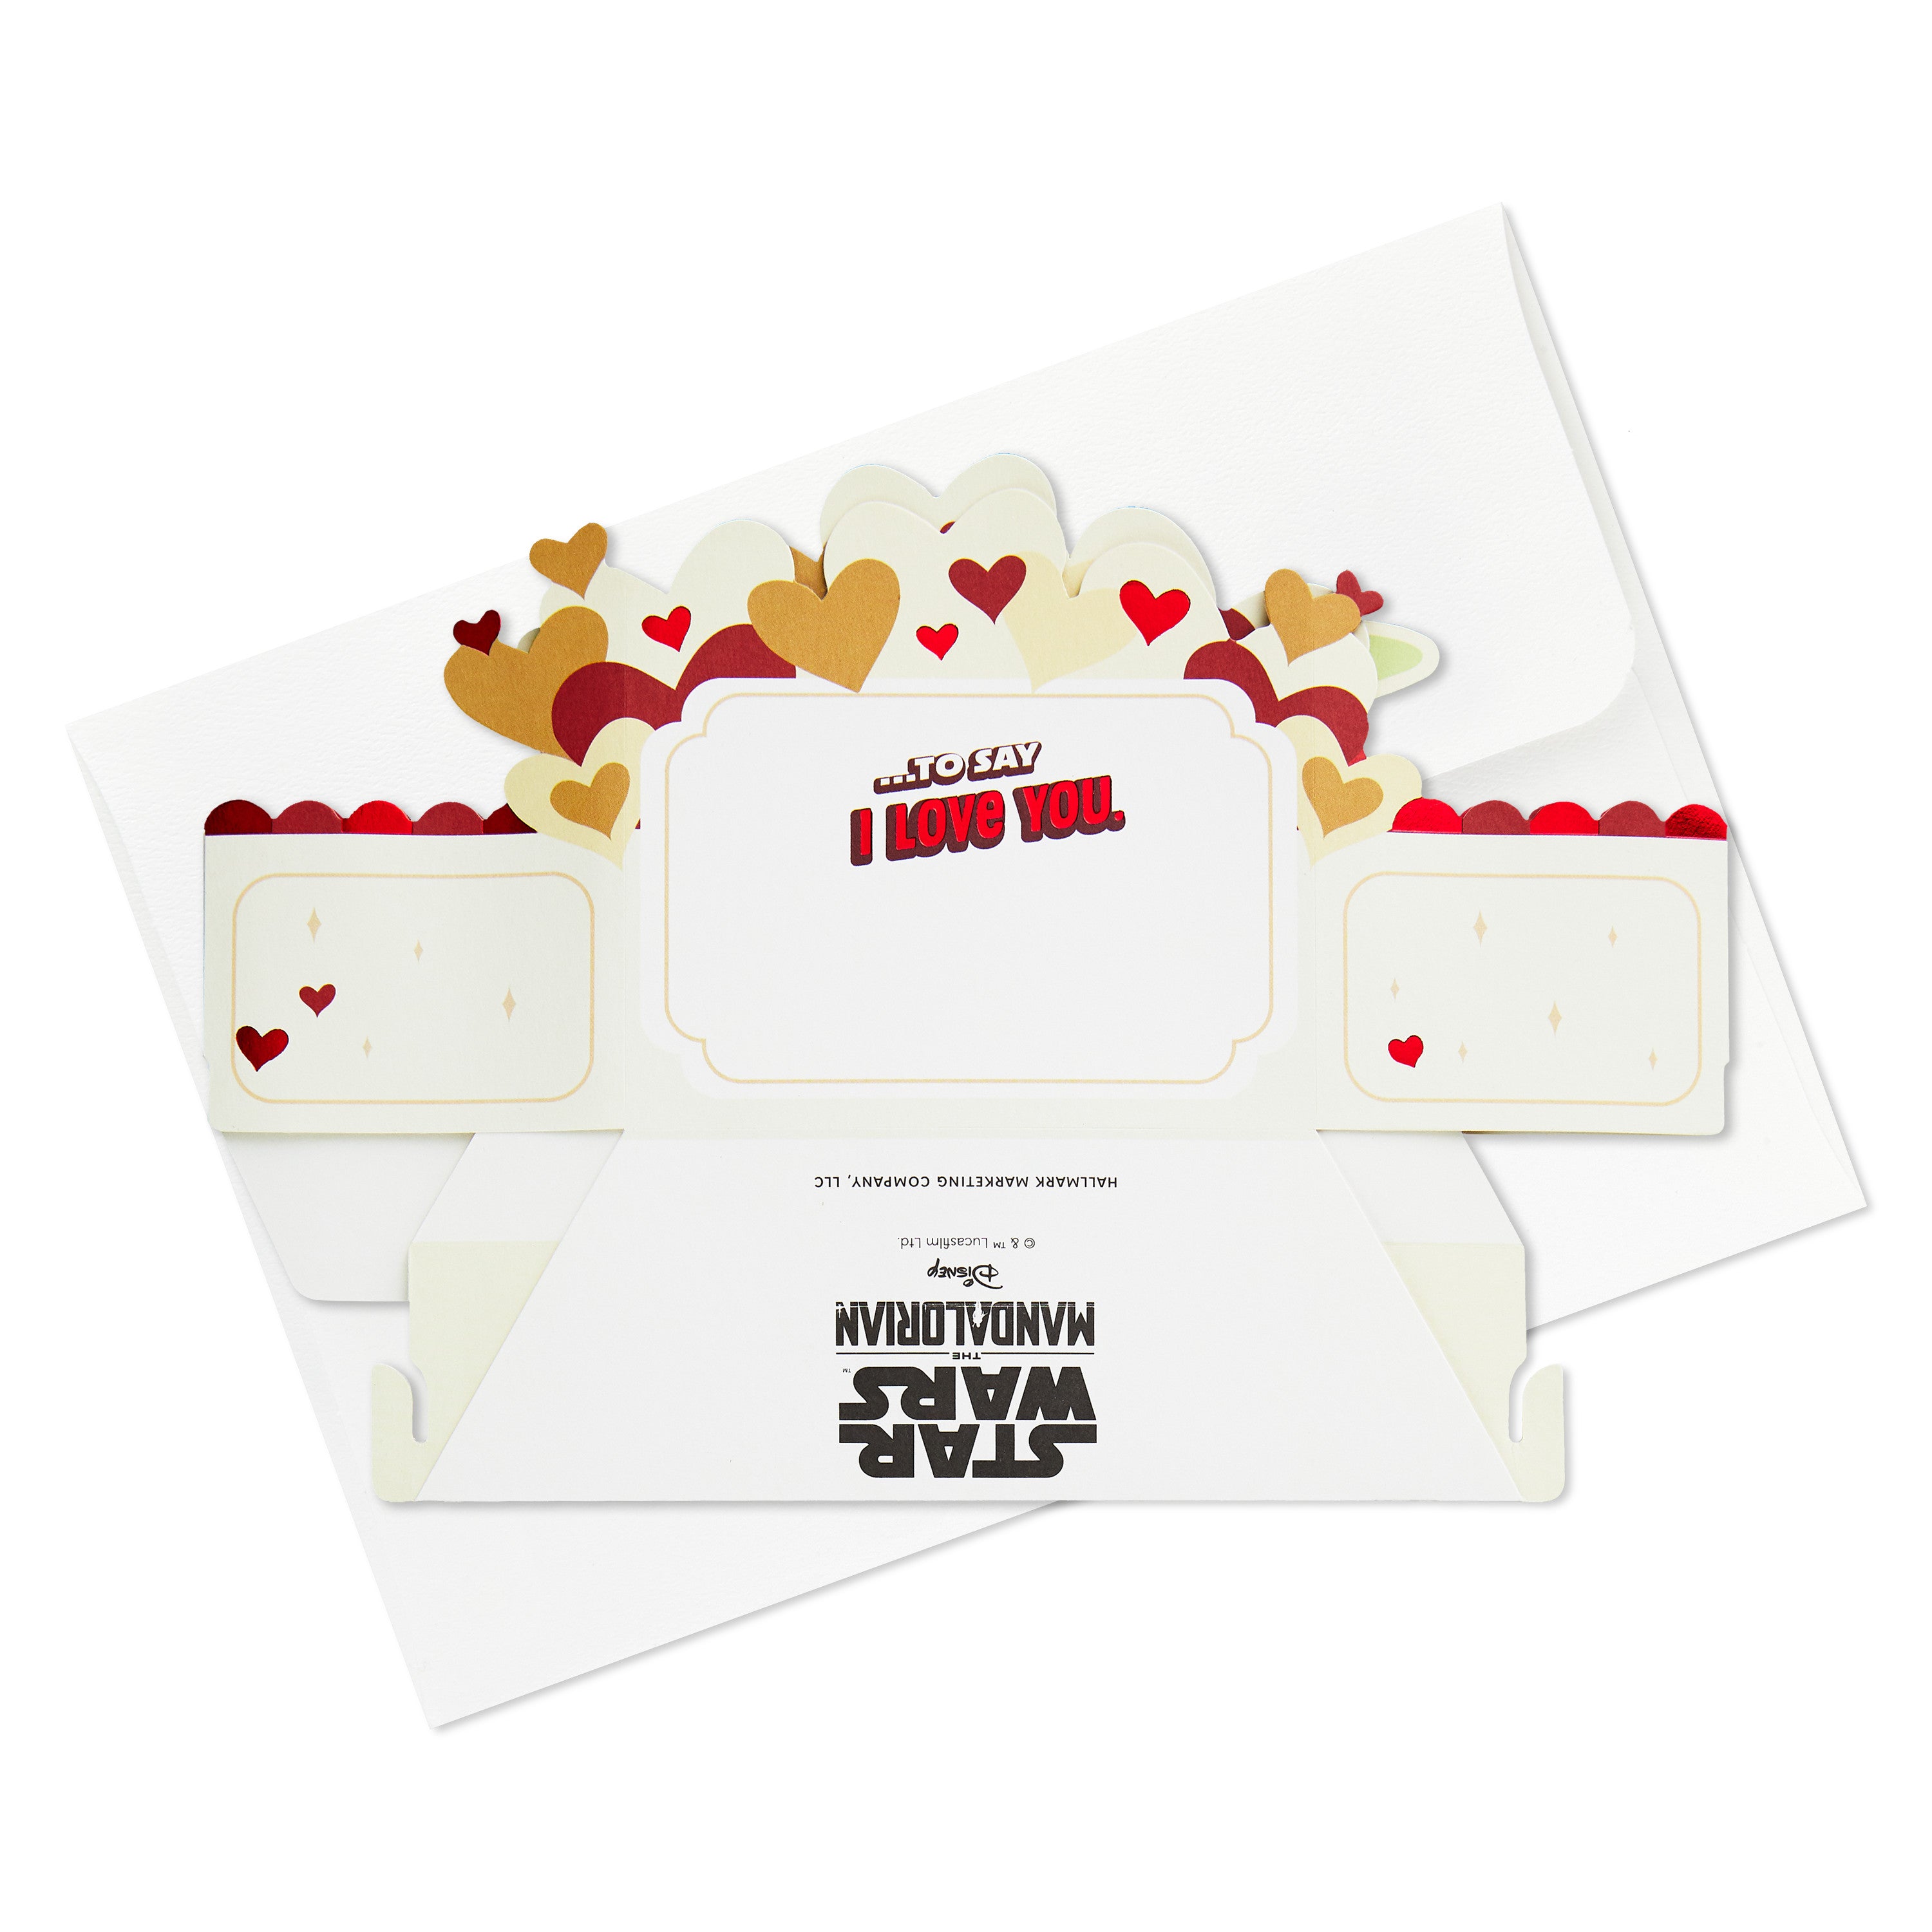 Paper Wonder Star Wars Baby Yoda Pop Up Love Card, Valentines Day Card, or Anniversary Card (Reaching Out)